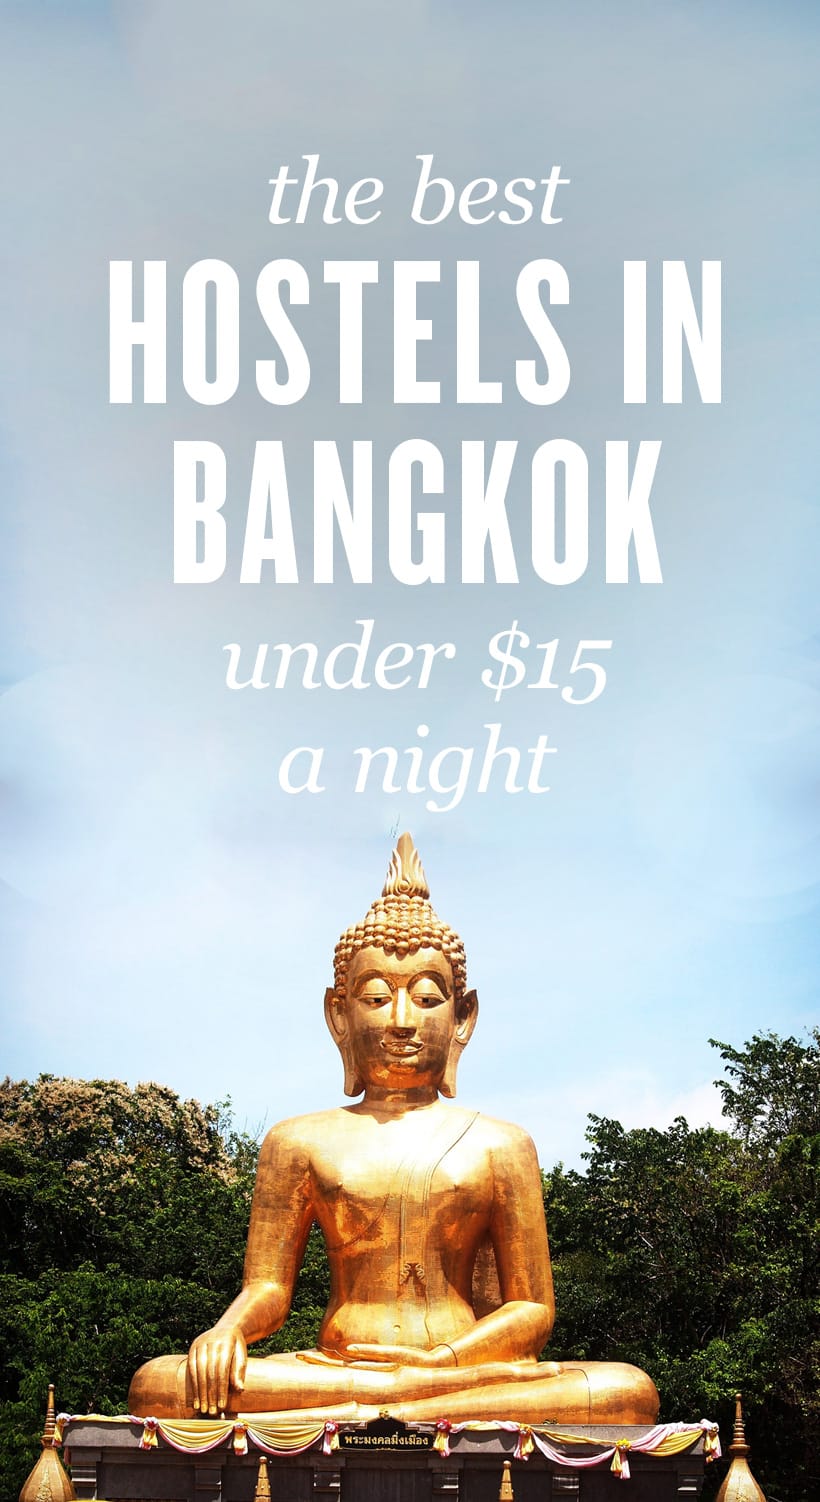 Ultimate List of the Best Hostels in Bangkok, Thailand